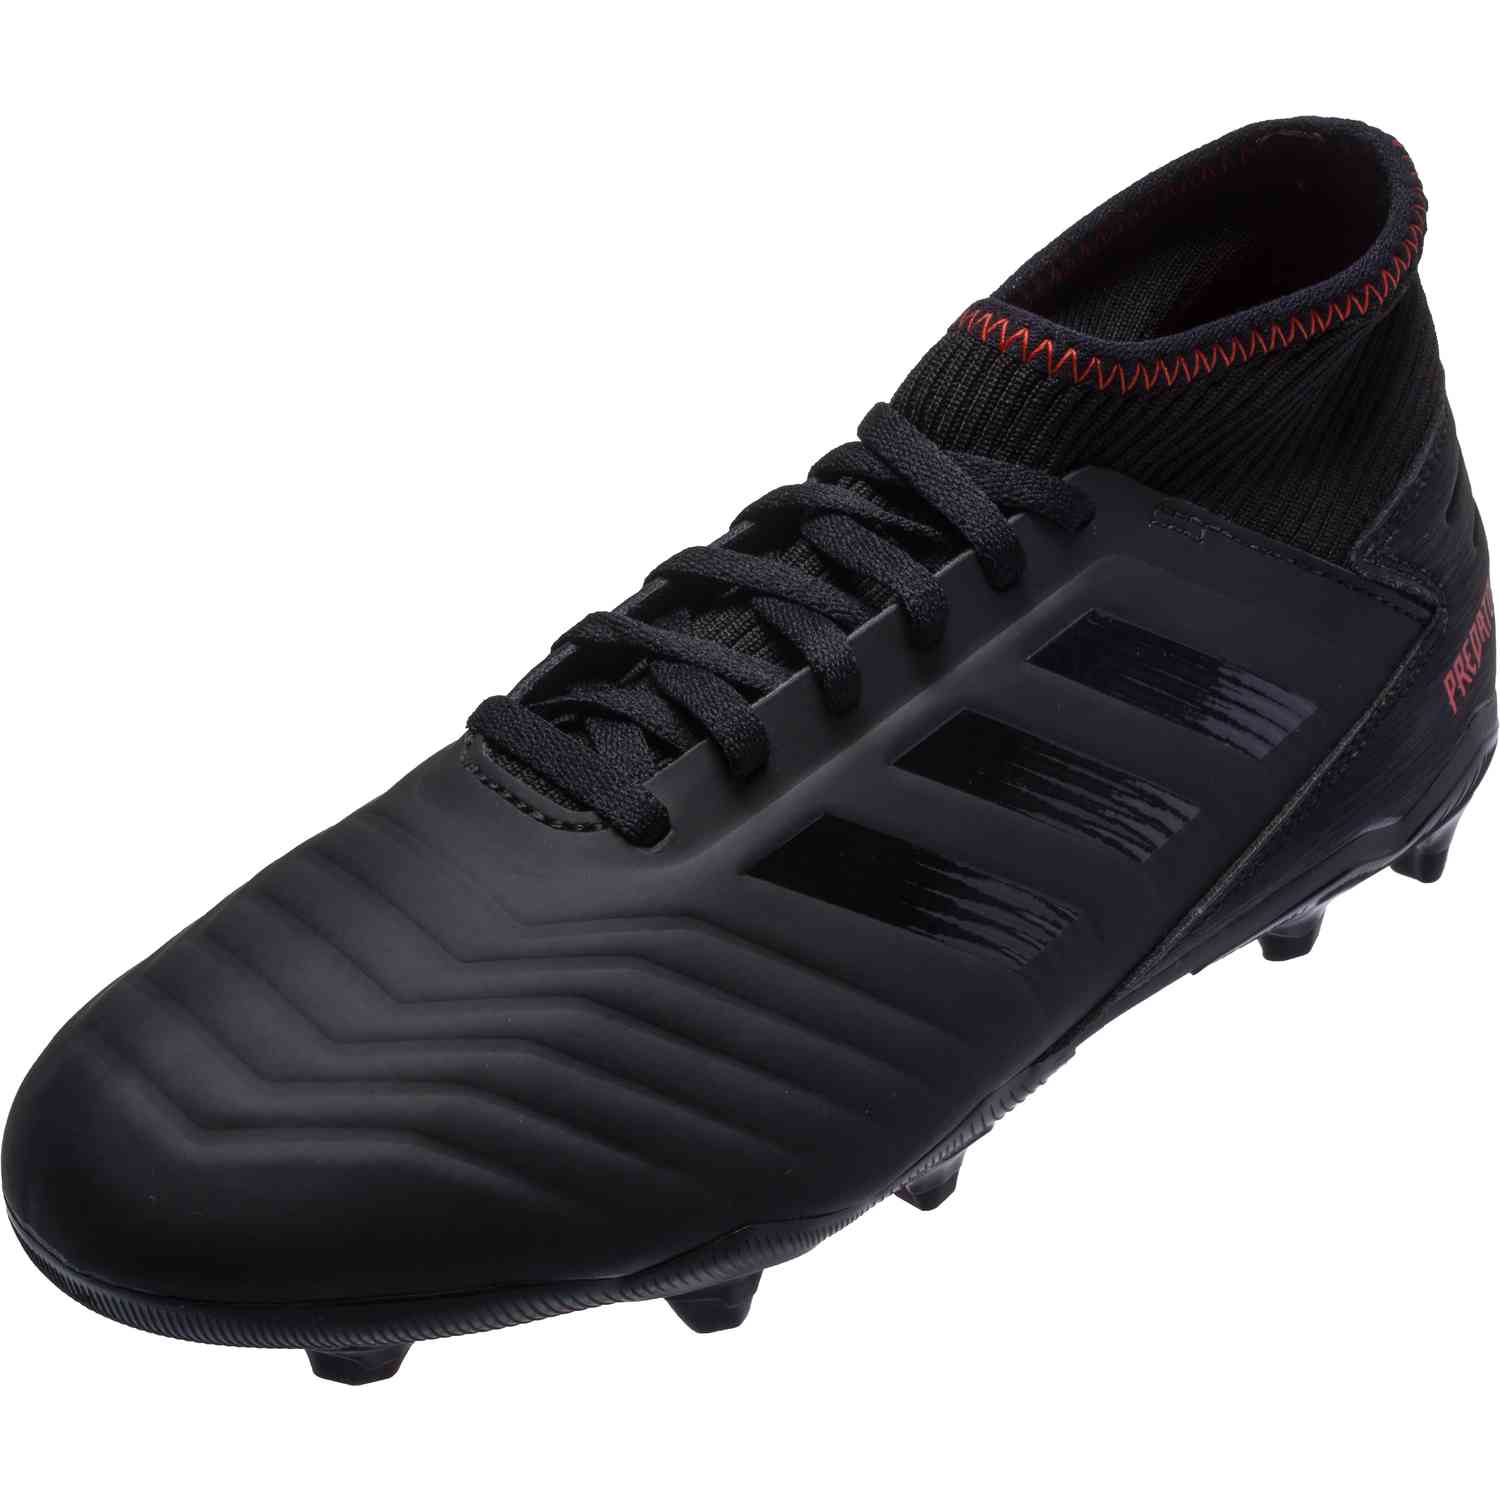 predator 19.3 firm ground cleats youth